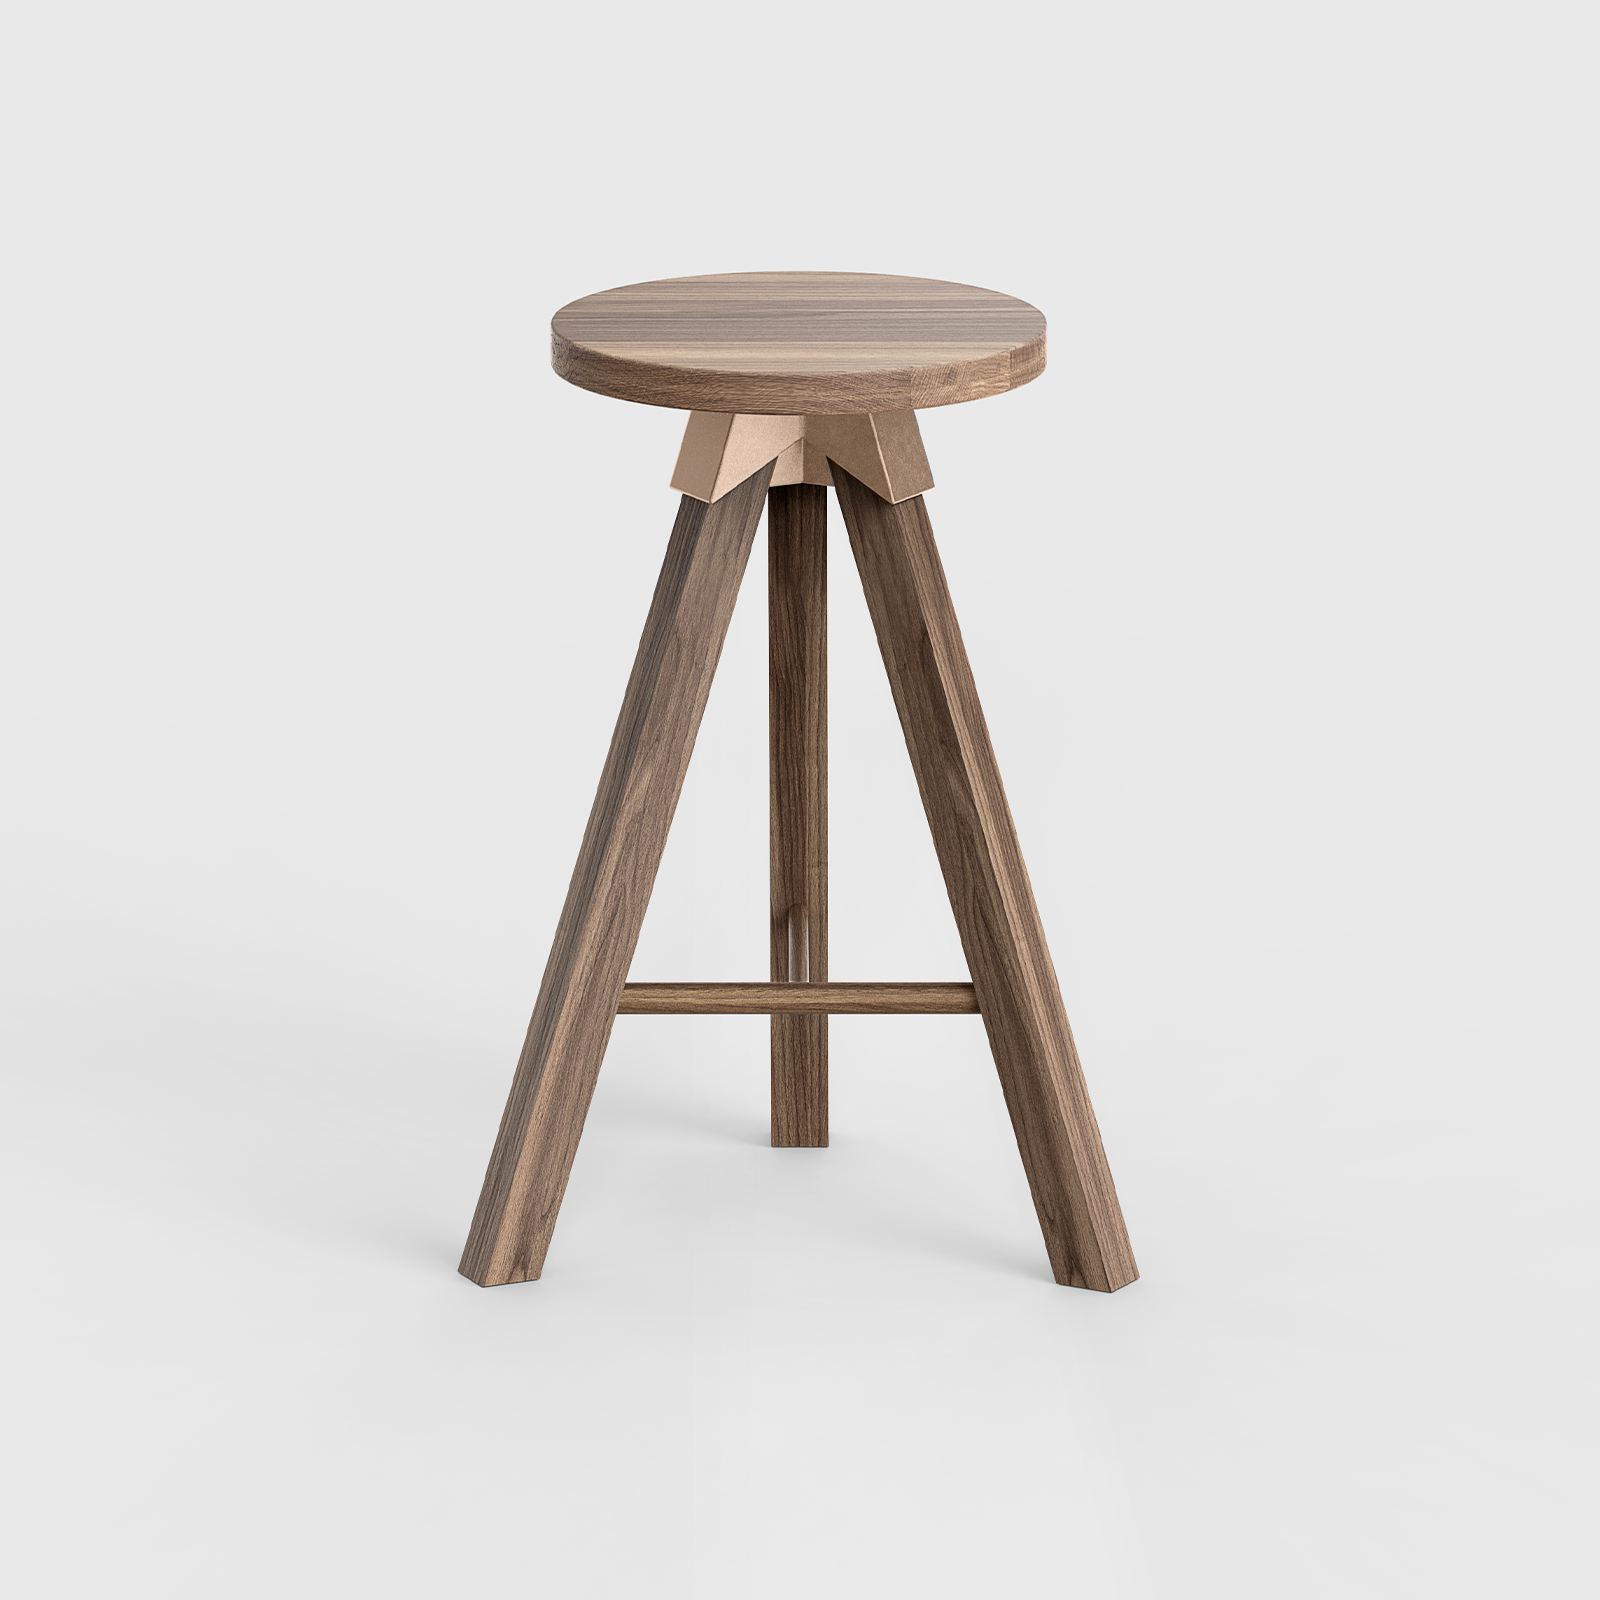 A-joint tall stool in solid American Walnut with cast bronze A-joint